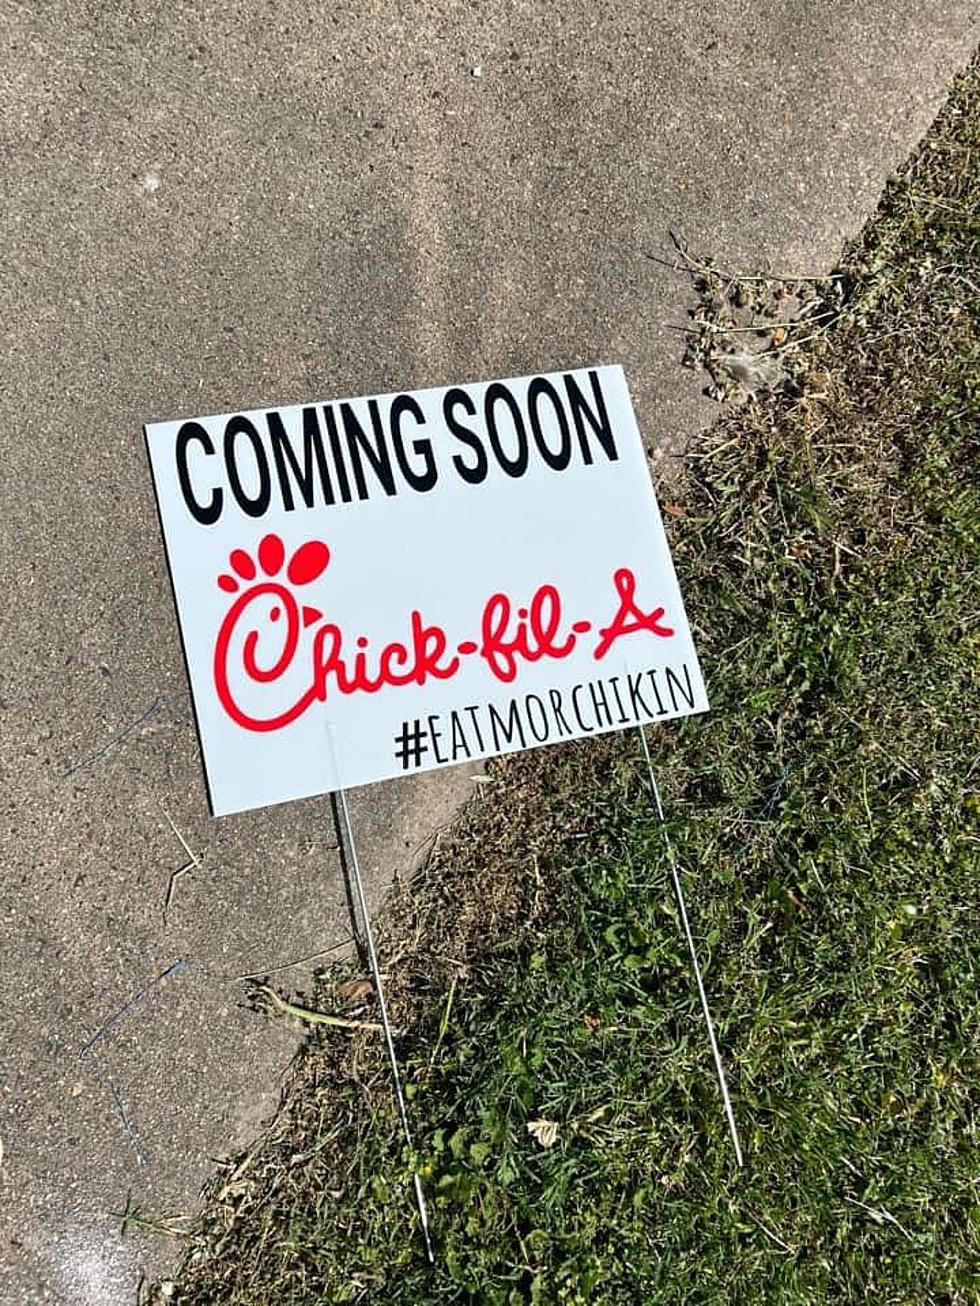 Pranksters Announce The Opening Of A Chick-Fil-A Location That Doesn’t Exist